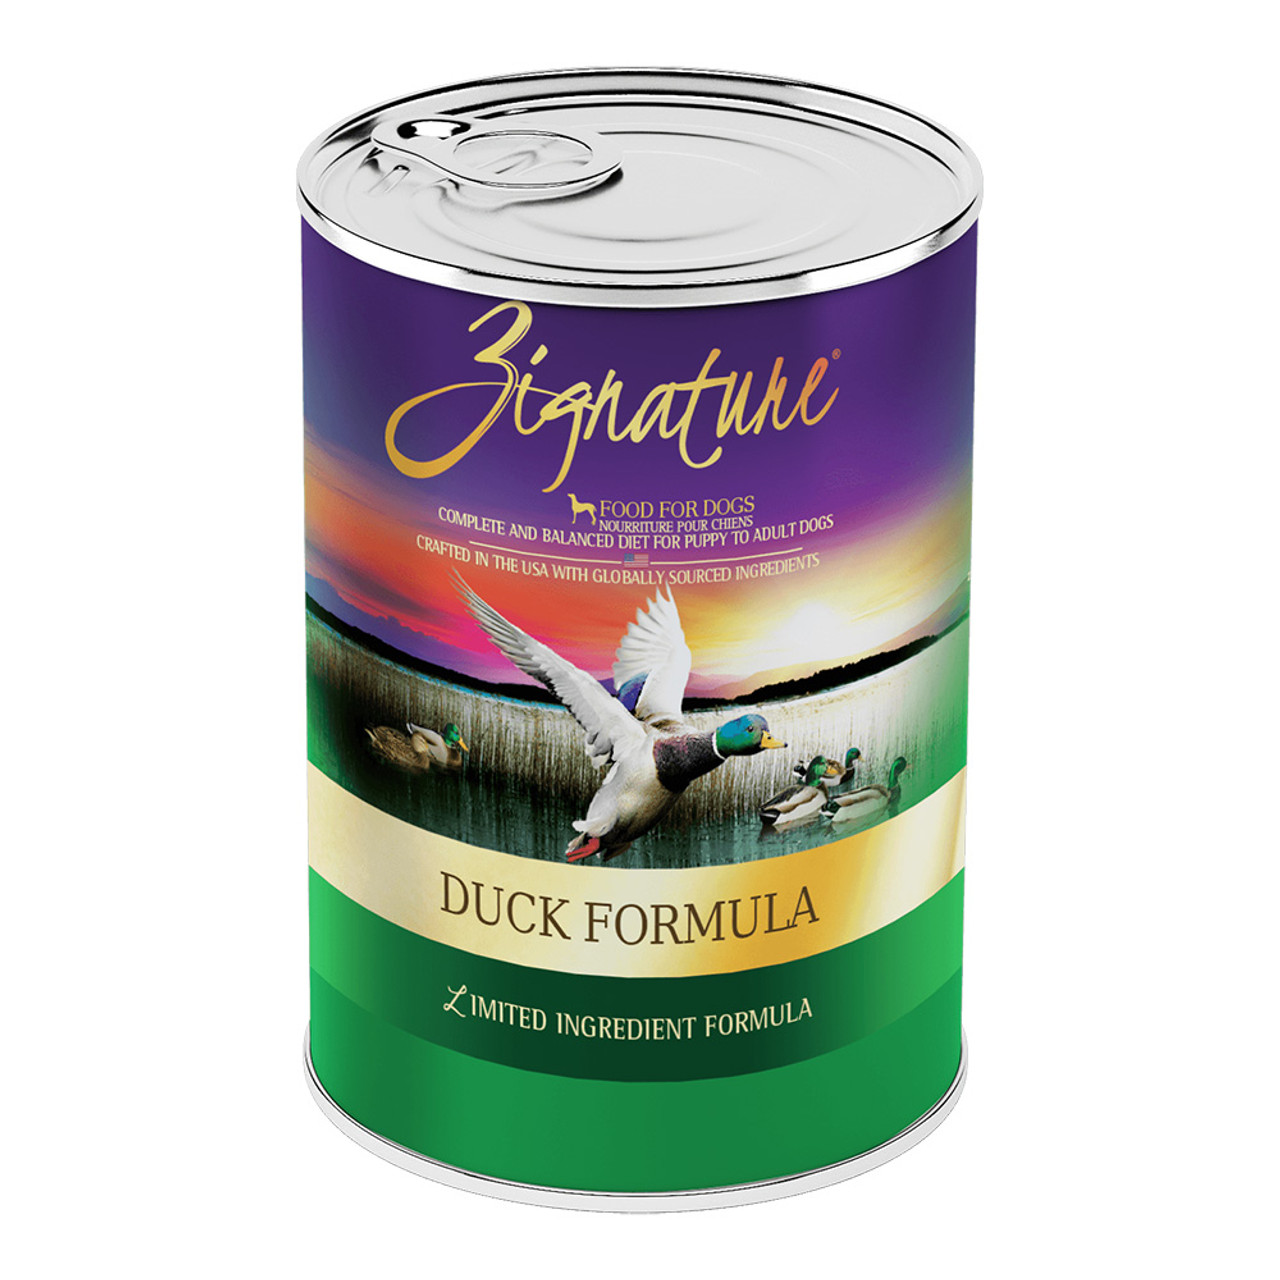 Pet Food Express Zignature Duck Formula Canned Dog Food - Front